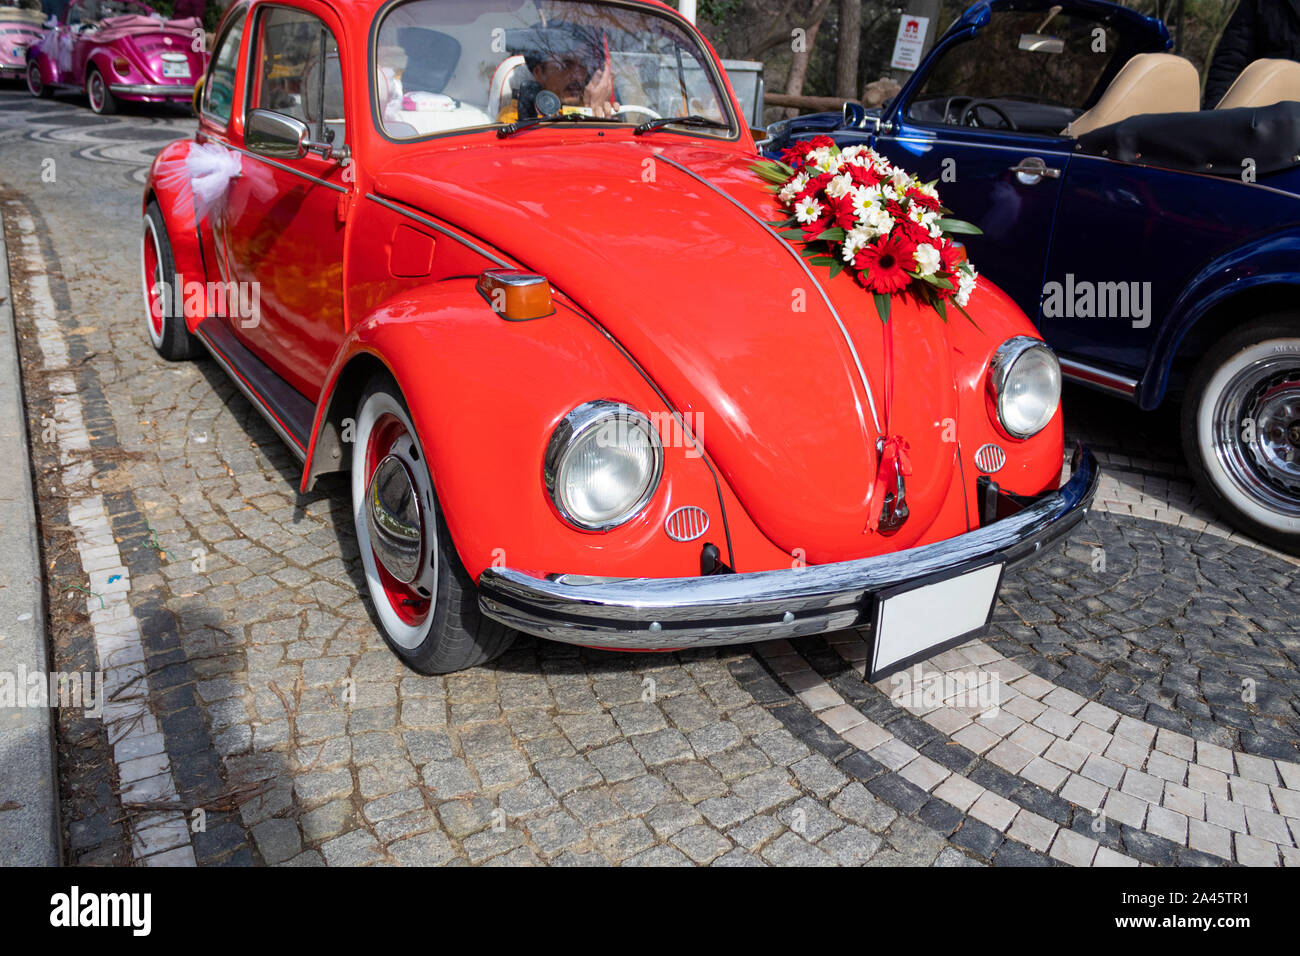 A man driving red flower ornate classic car on stone ground Stock Photo